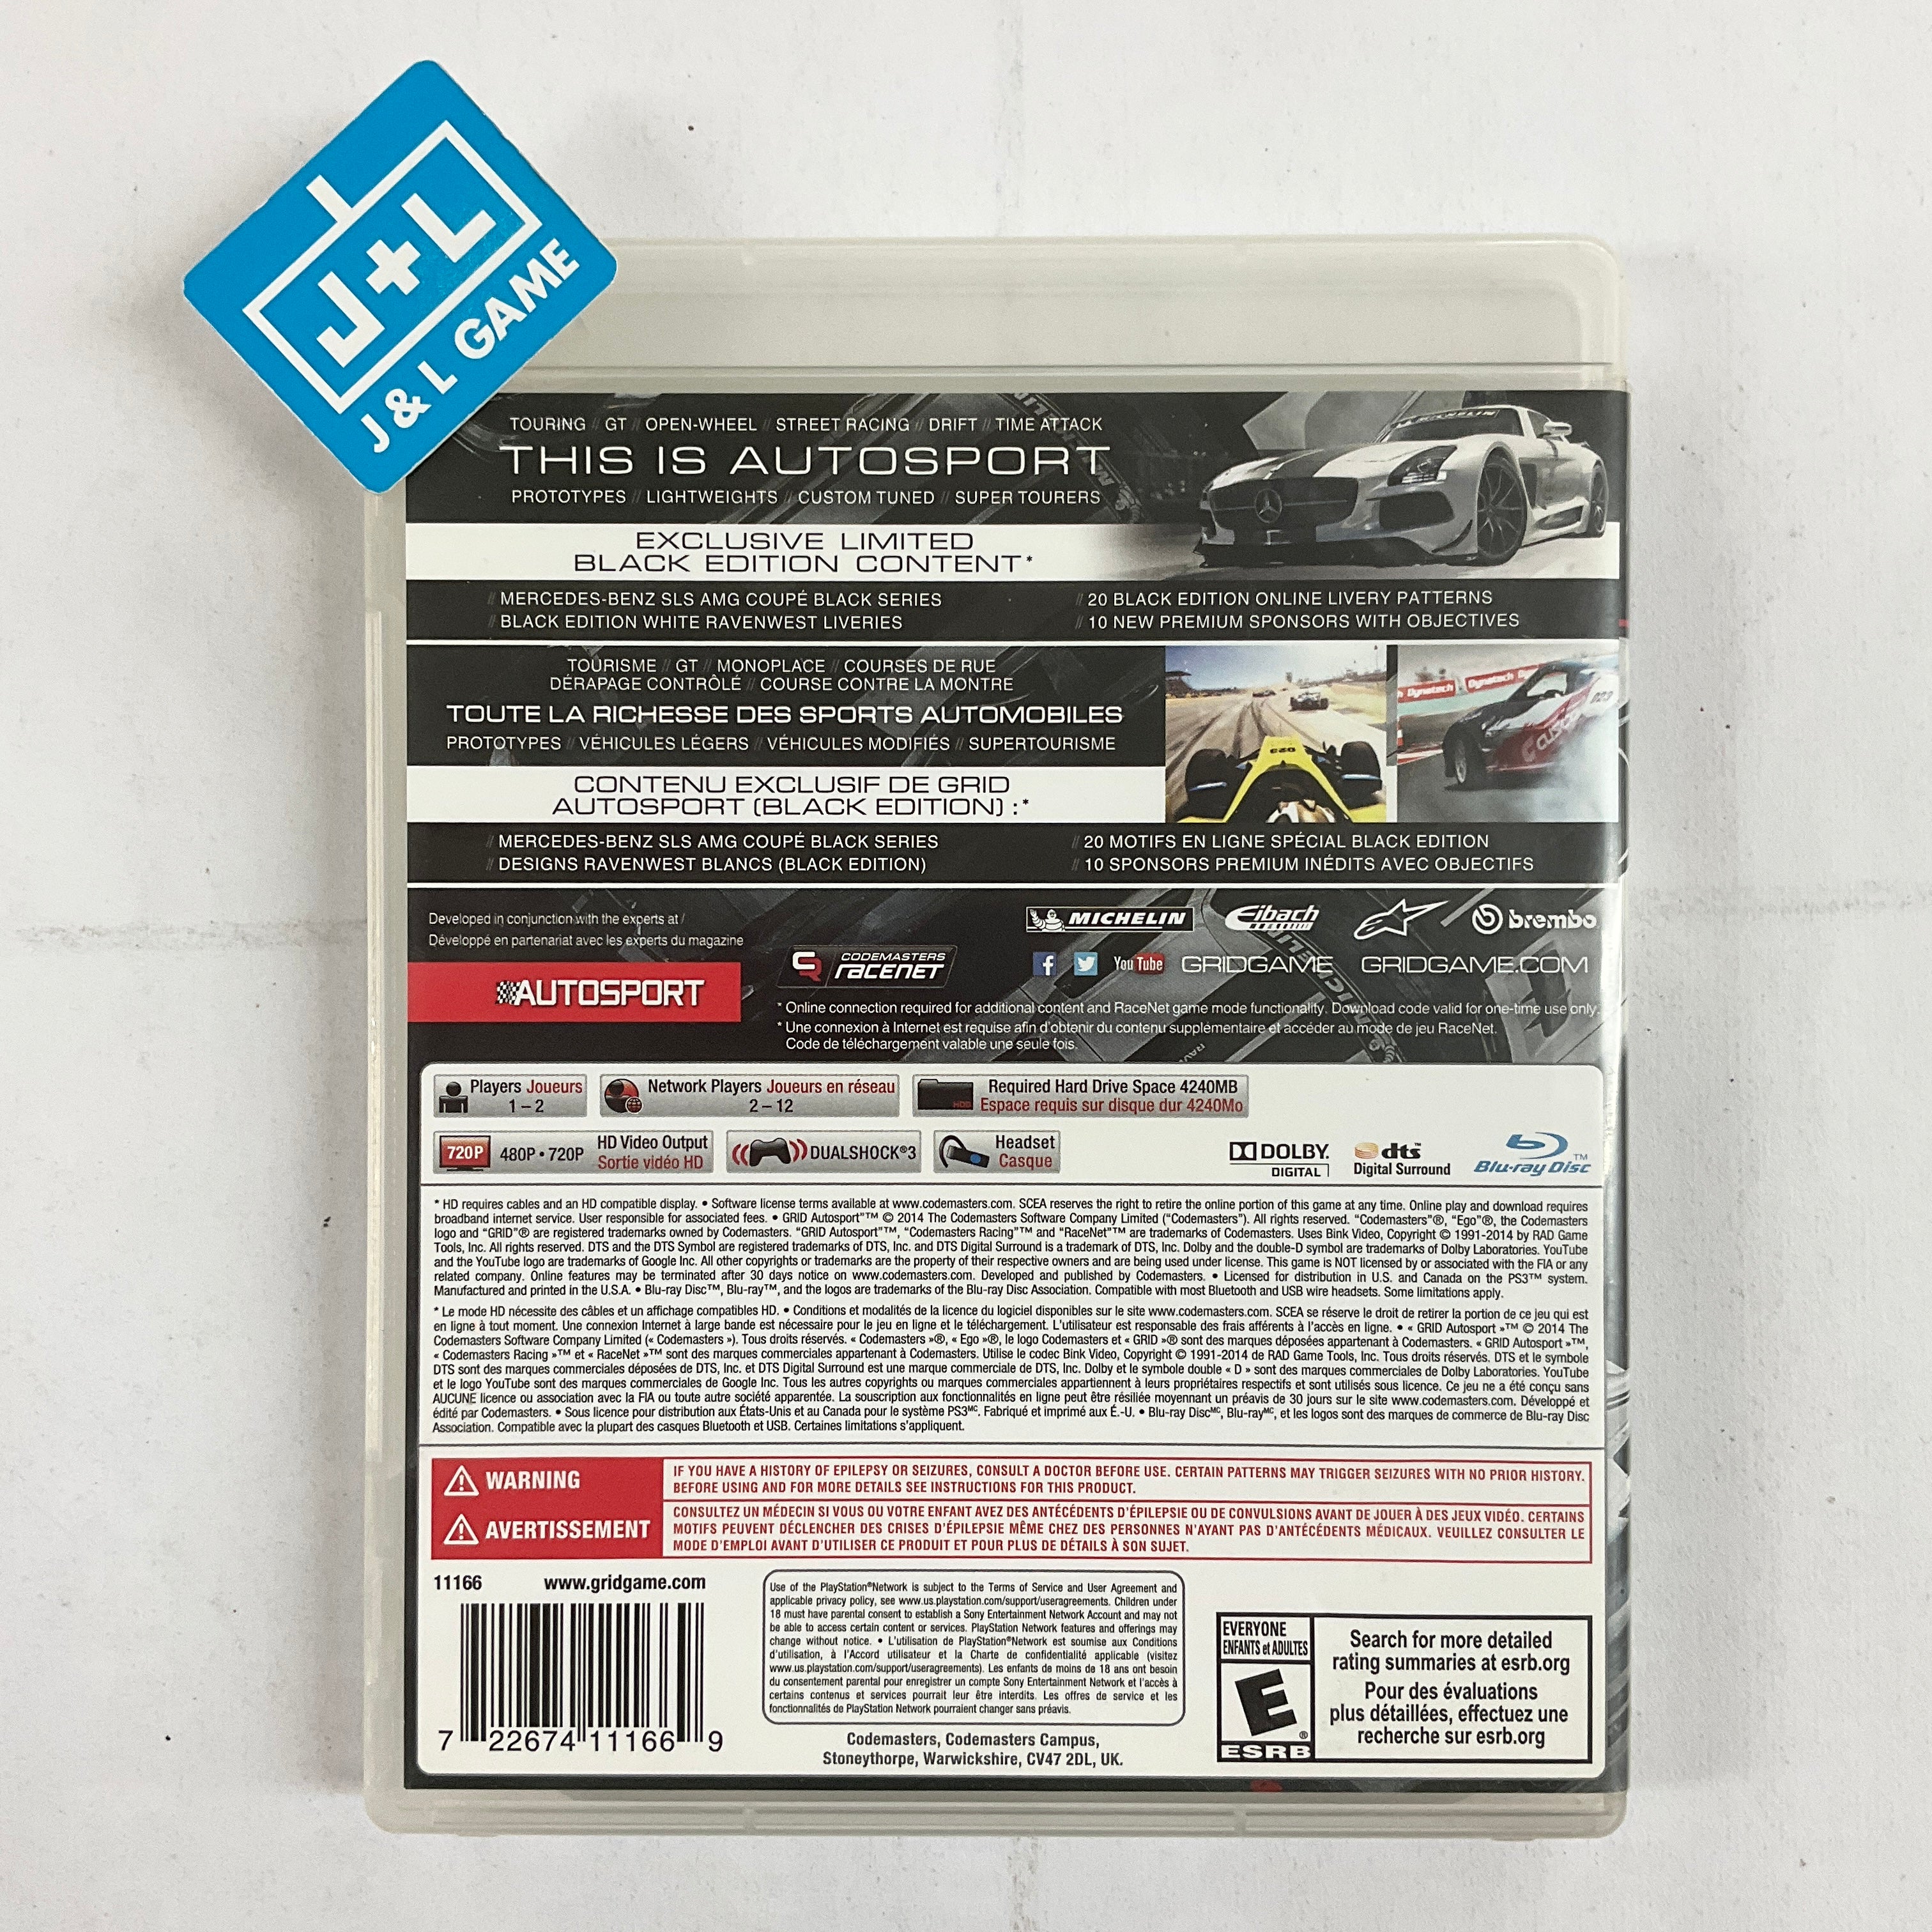 GRID Autosport (Limited Black Edition) - (PS3) Playstation 3 [Pre-Owned] Video Games Codemasters   